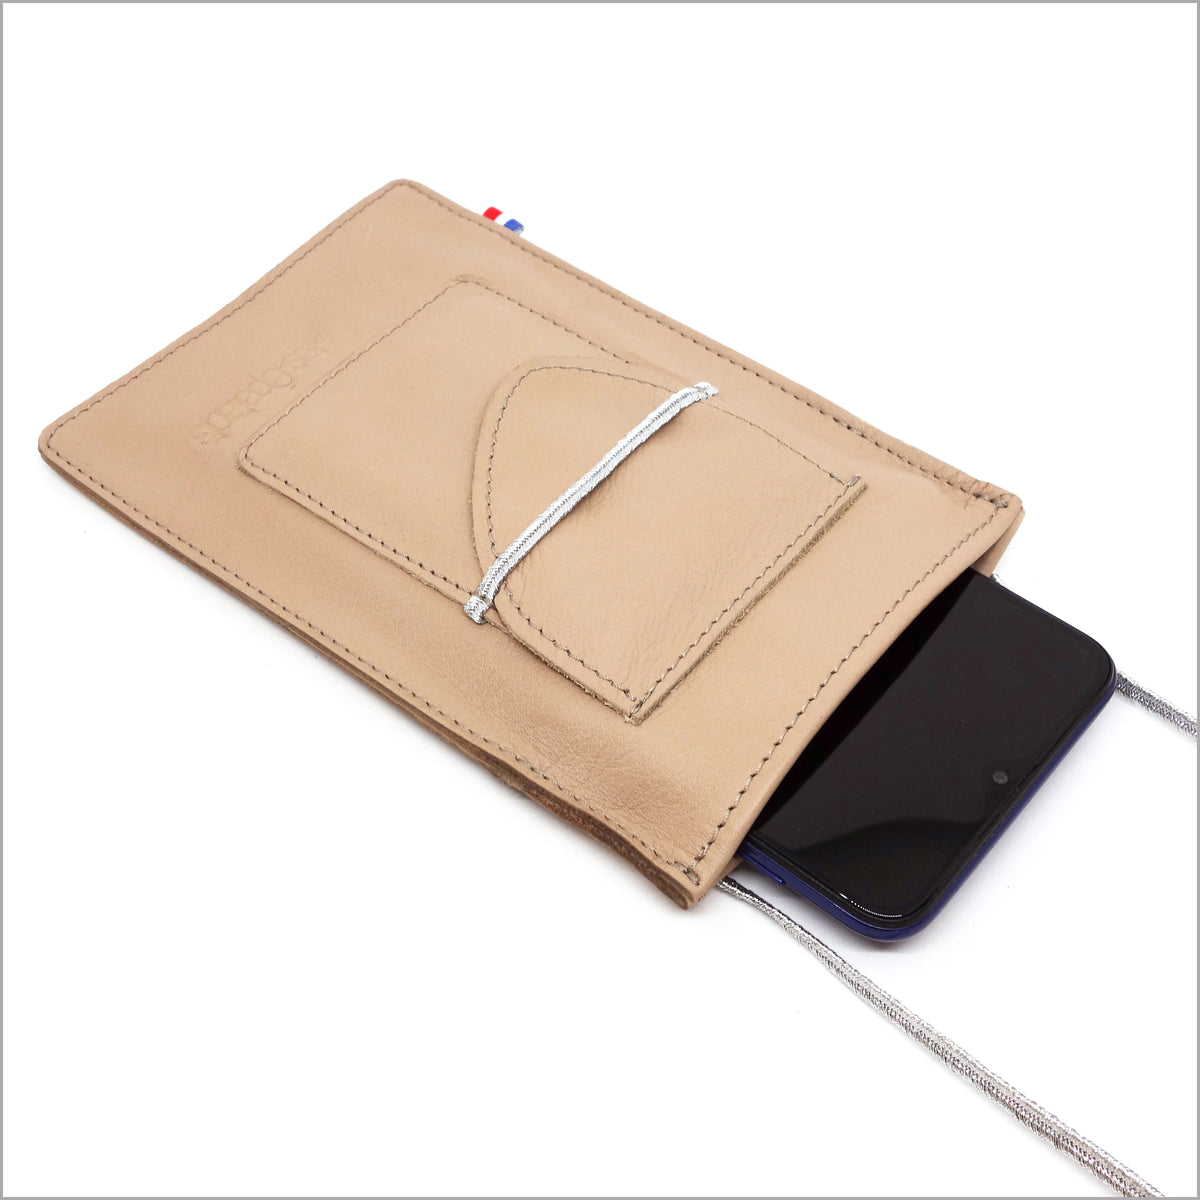 Phone pouch in nude leather with adjustable shoulder strap